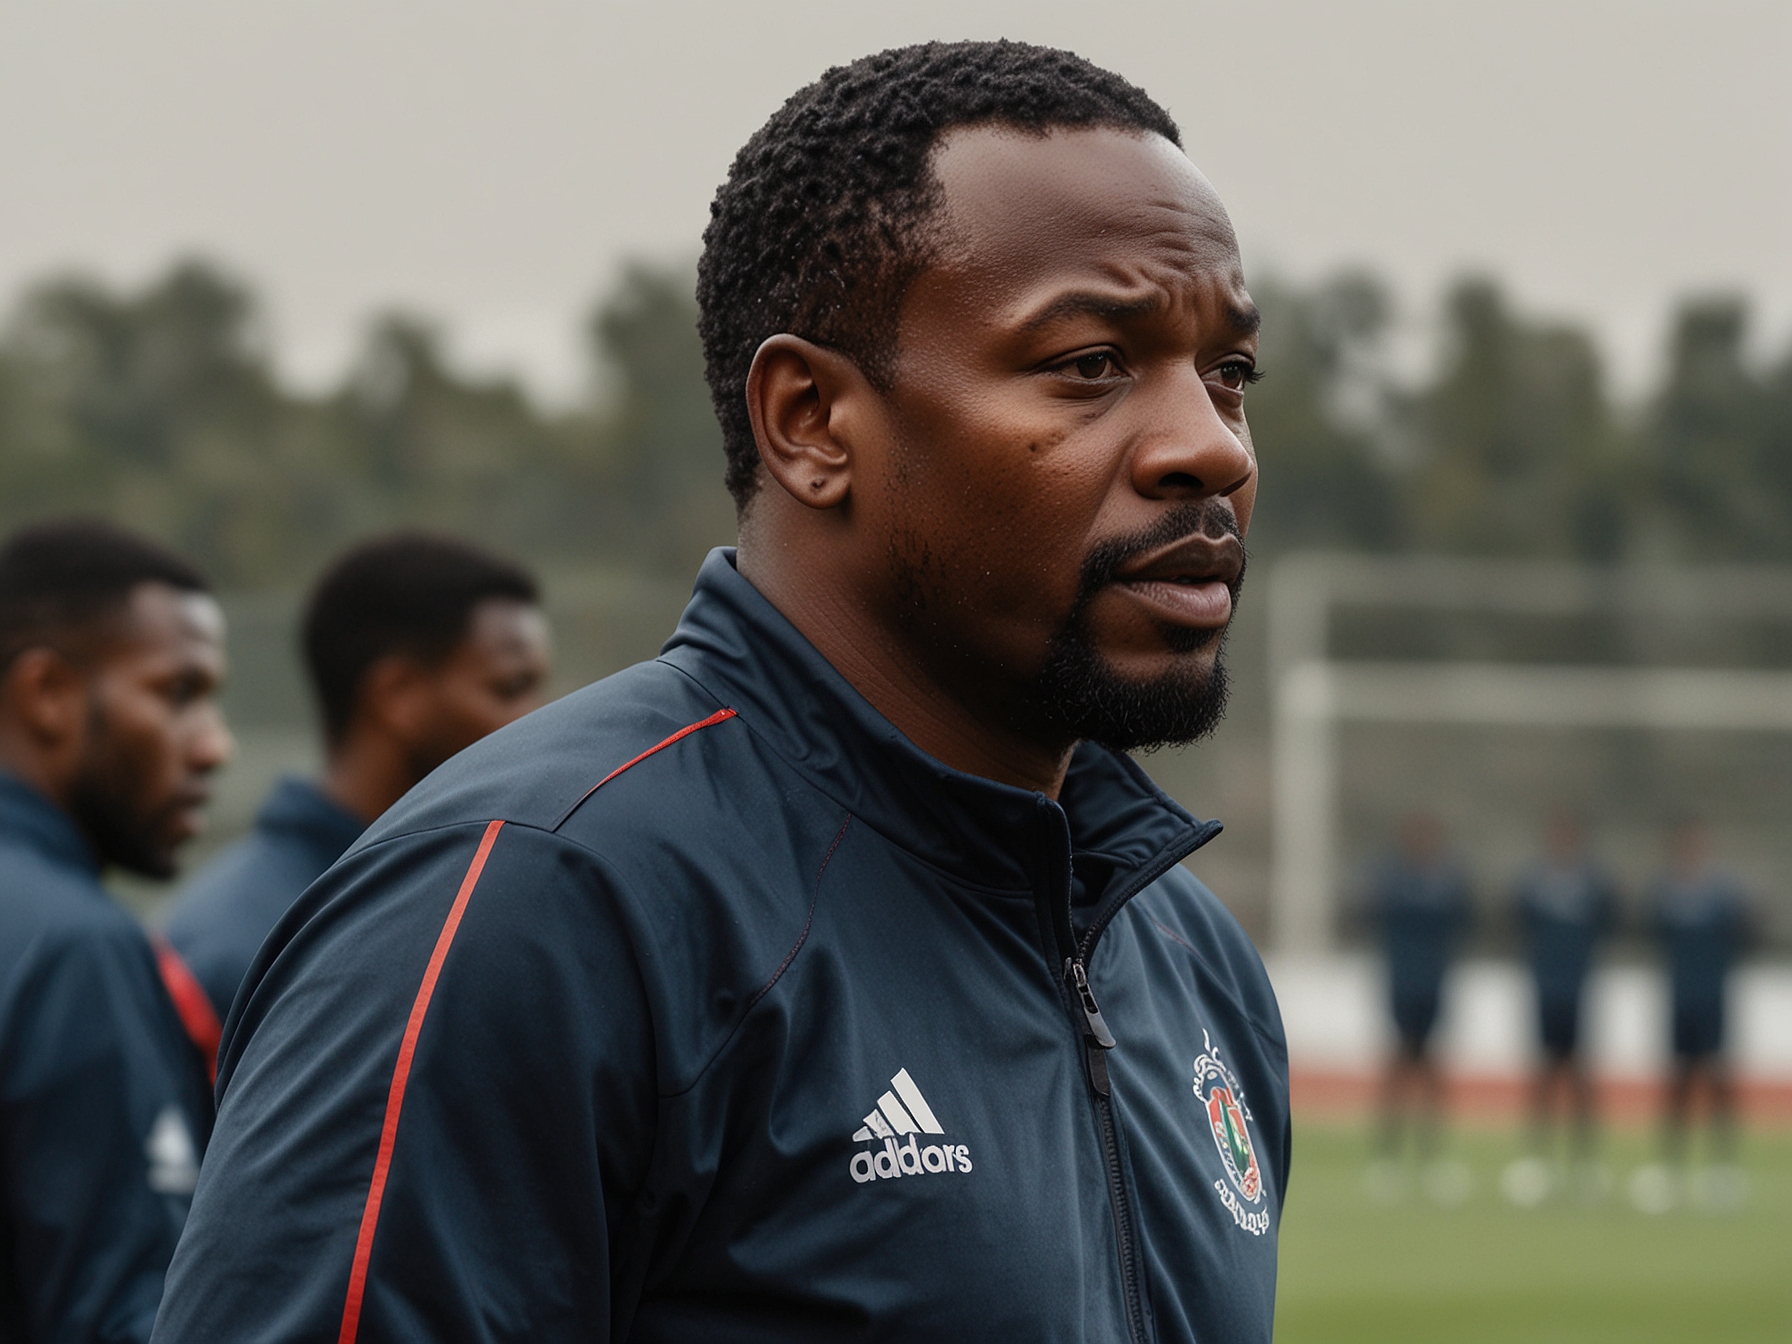 Phiwe Nomlomo, the newly appointed head coach of the Bulls, instructs the team during a training session, emphasizing his strategic approach and motivational coaching style.